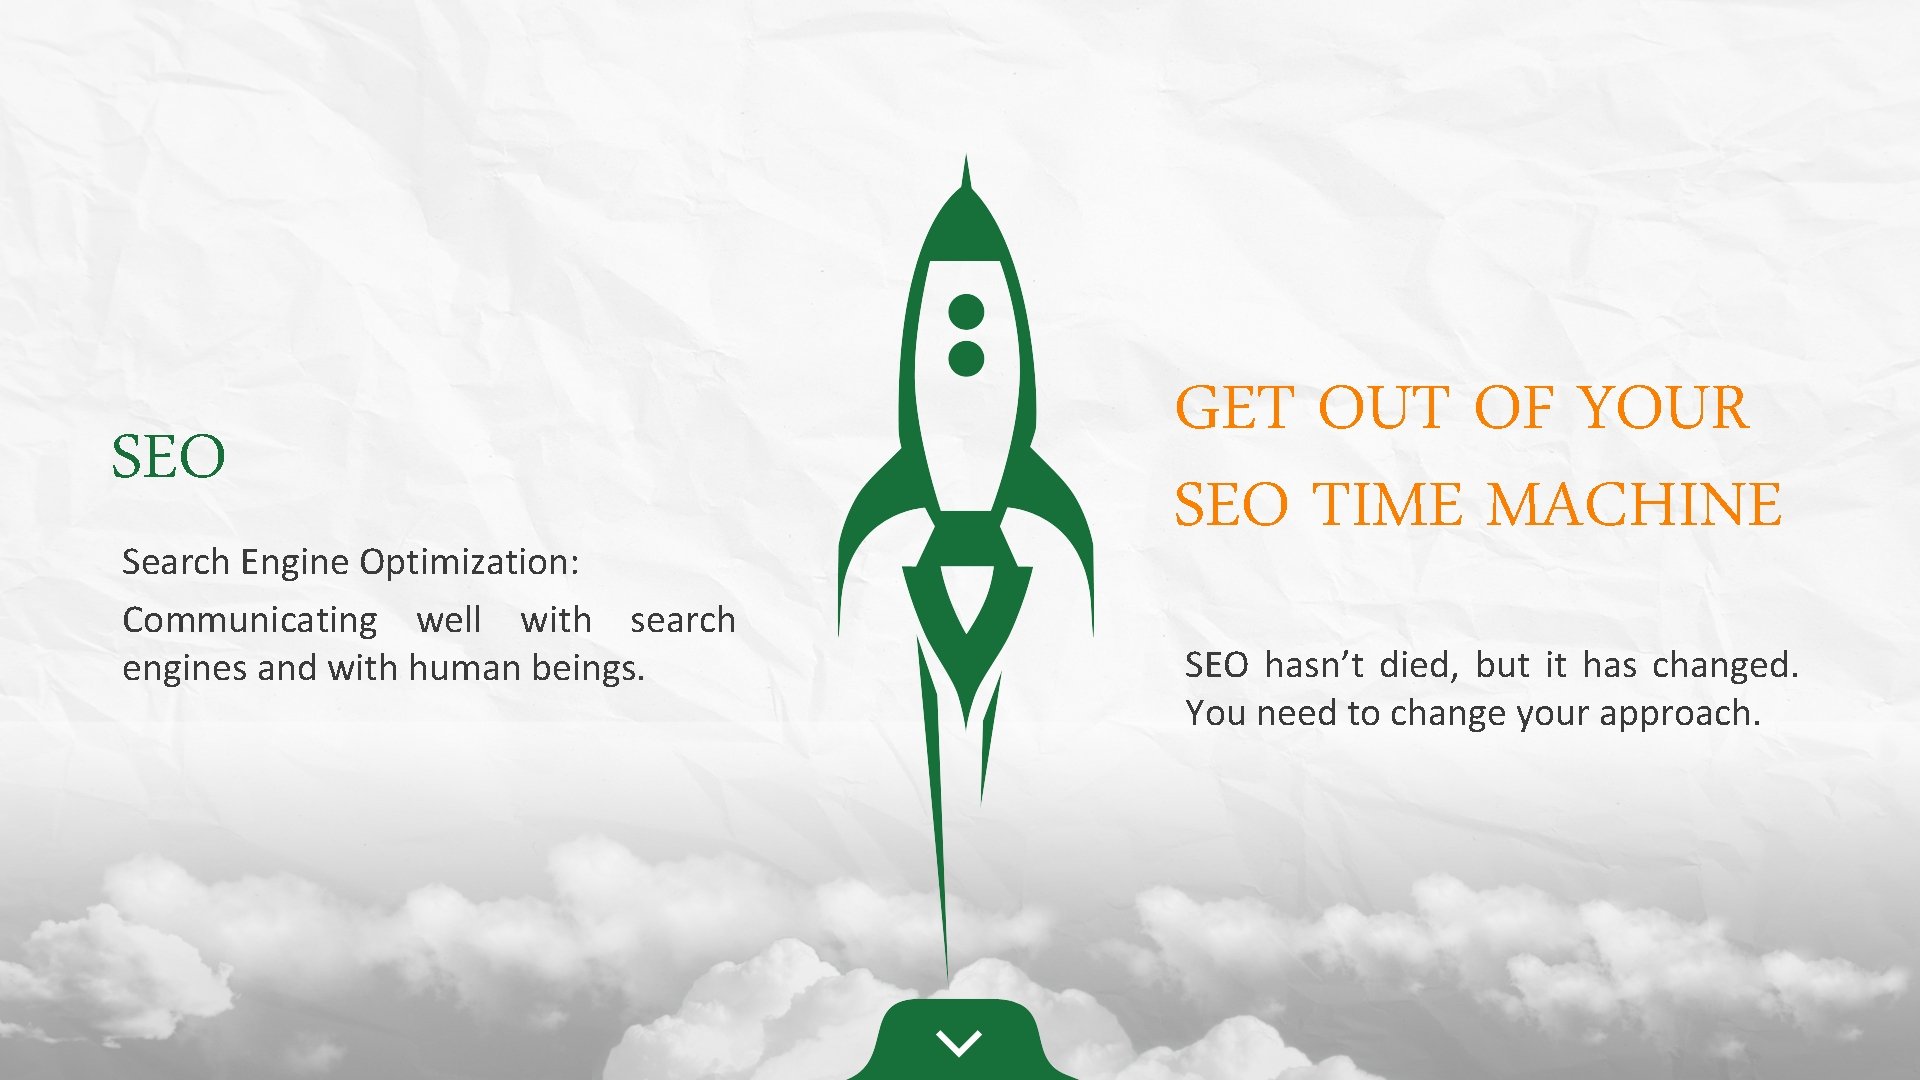 SEO Search Engine Optimization: Communicating well with search engines and with human beings. GET